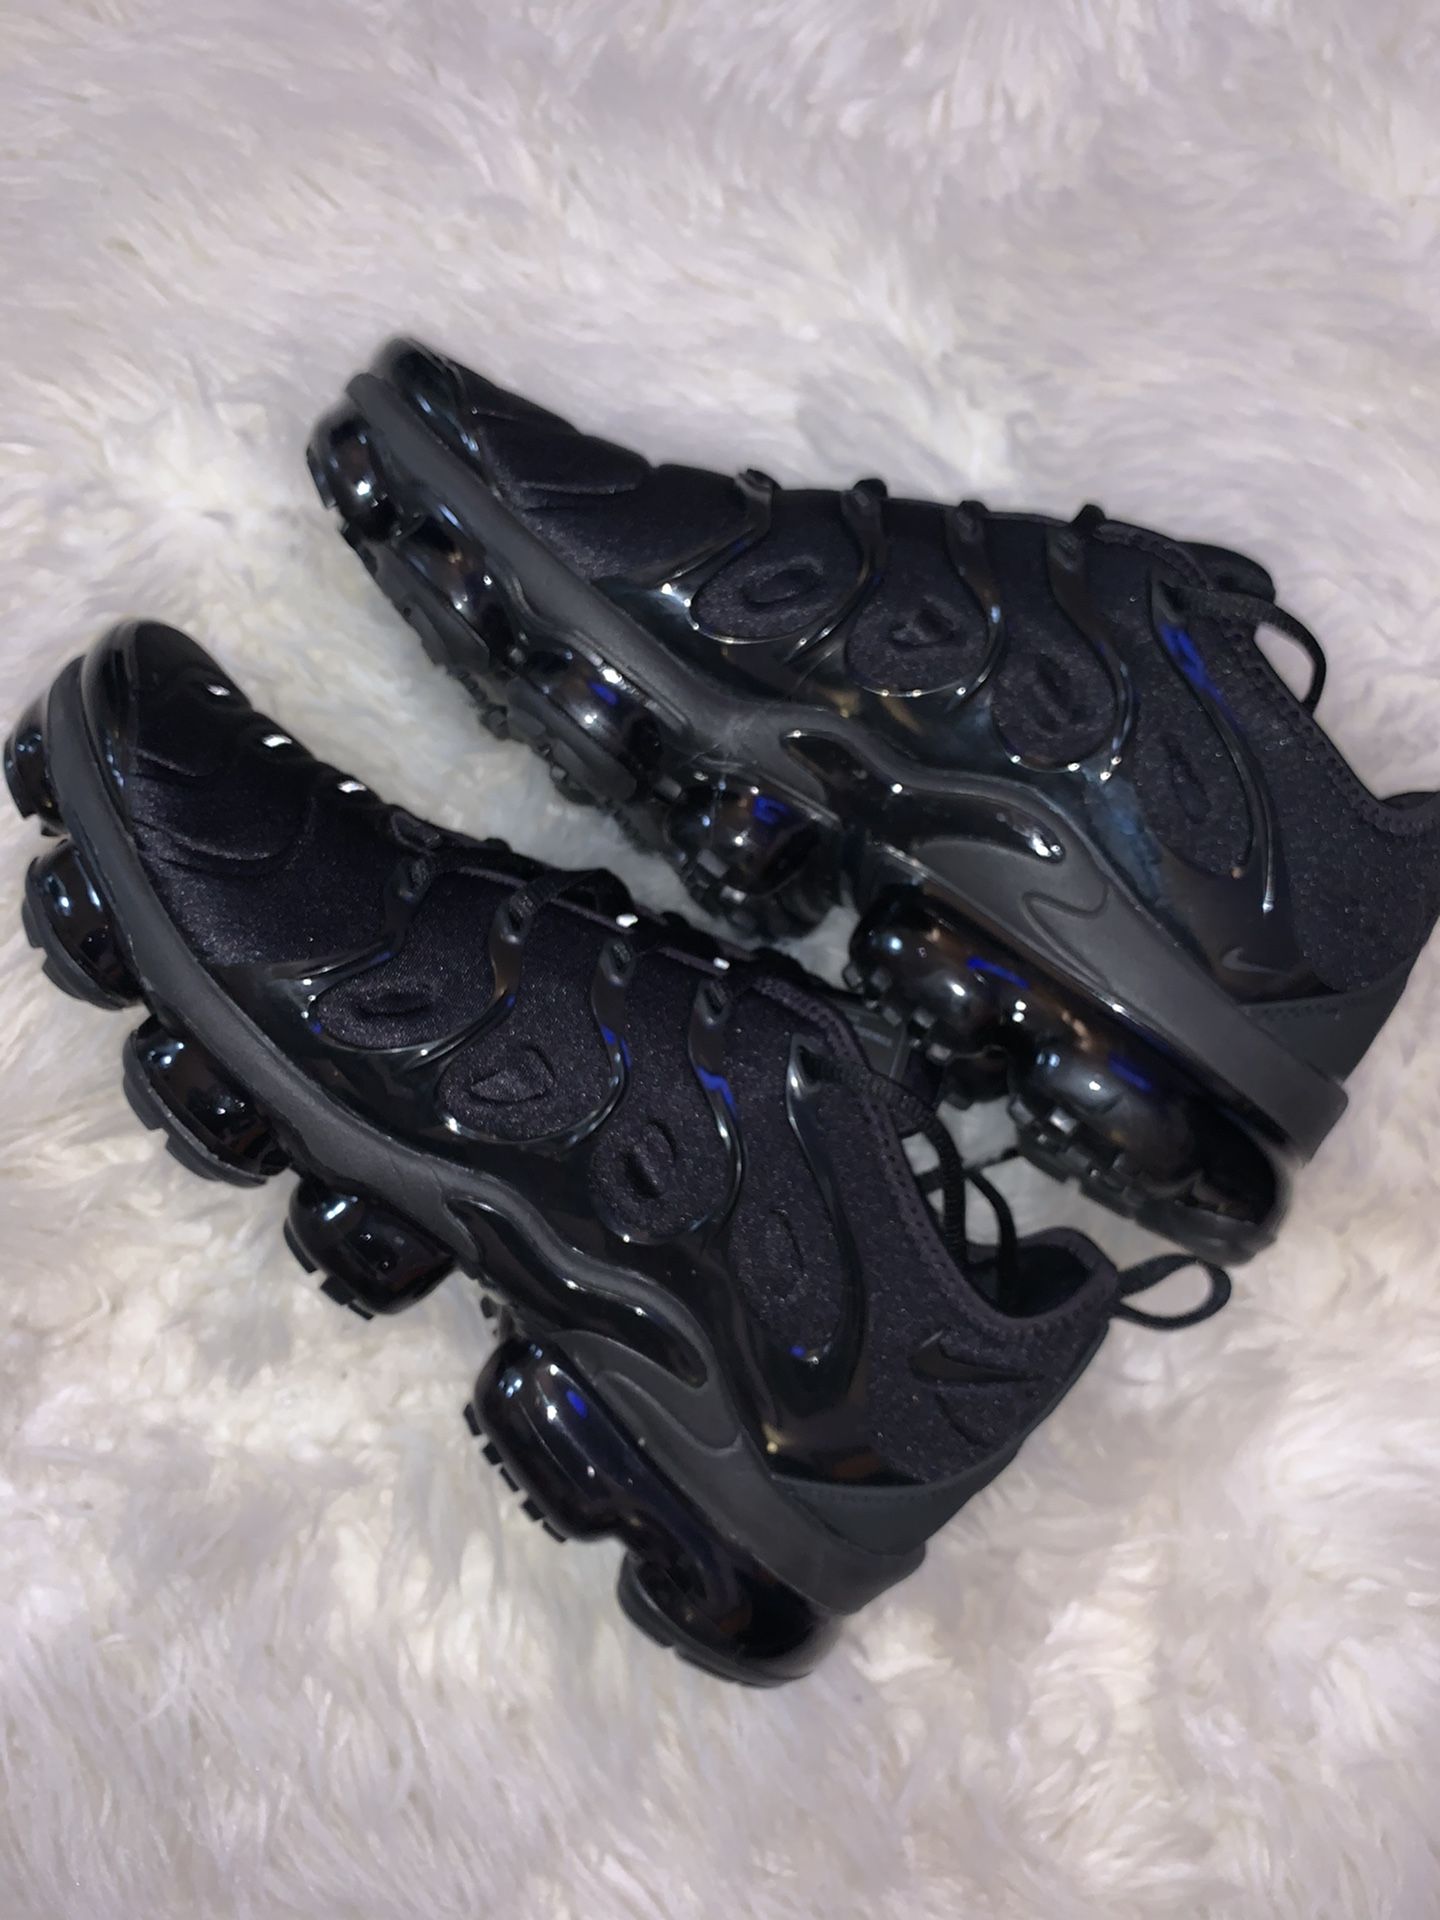 Brand new Nike vapor max plus -size 9.5 men’s one month old. Worn once